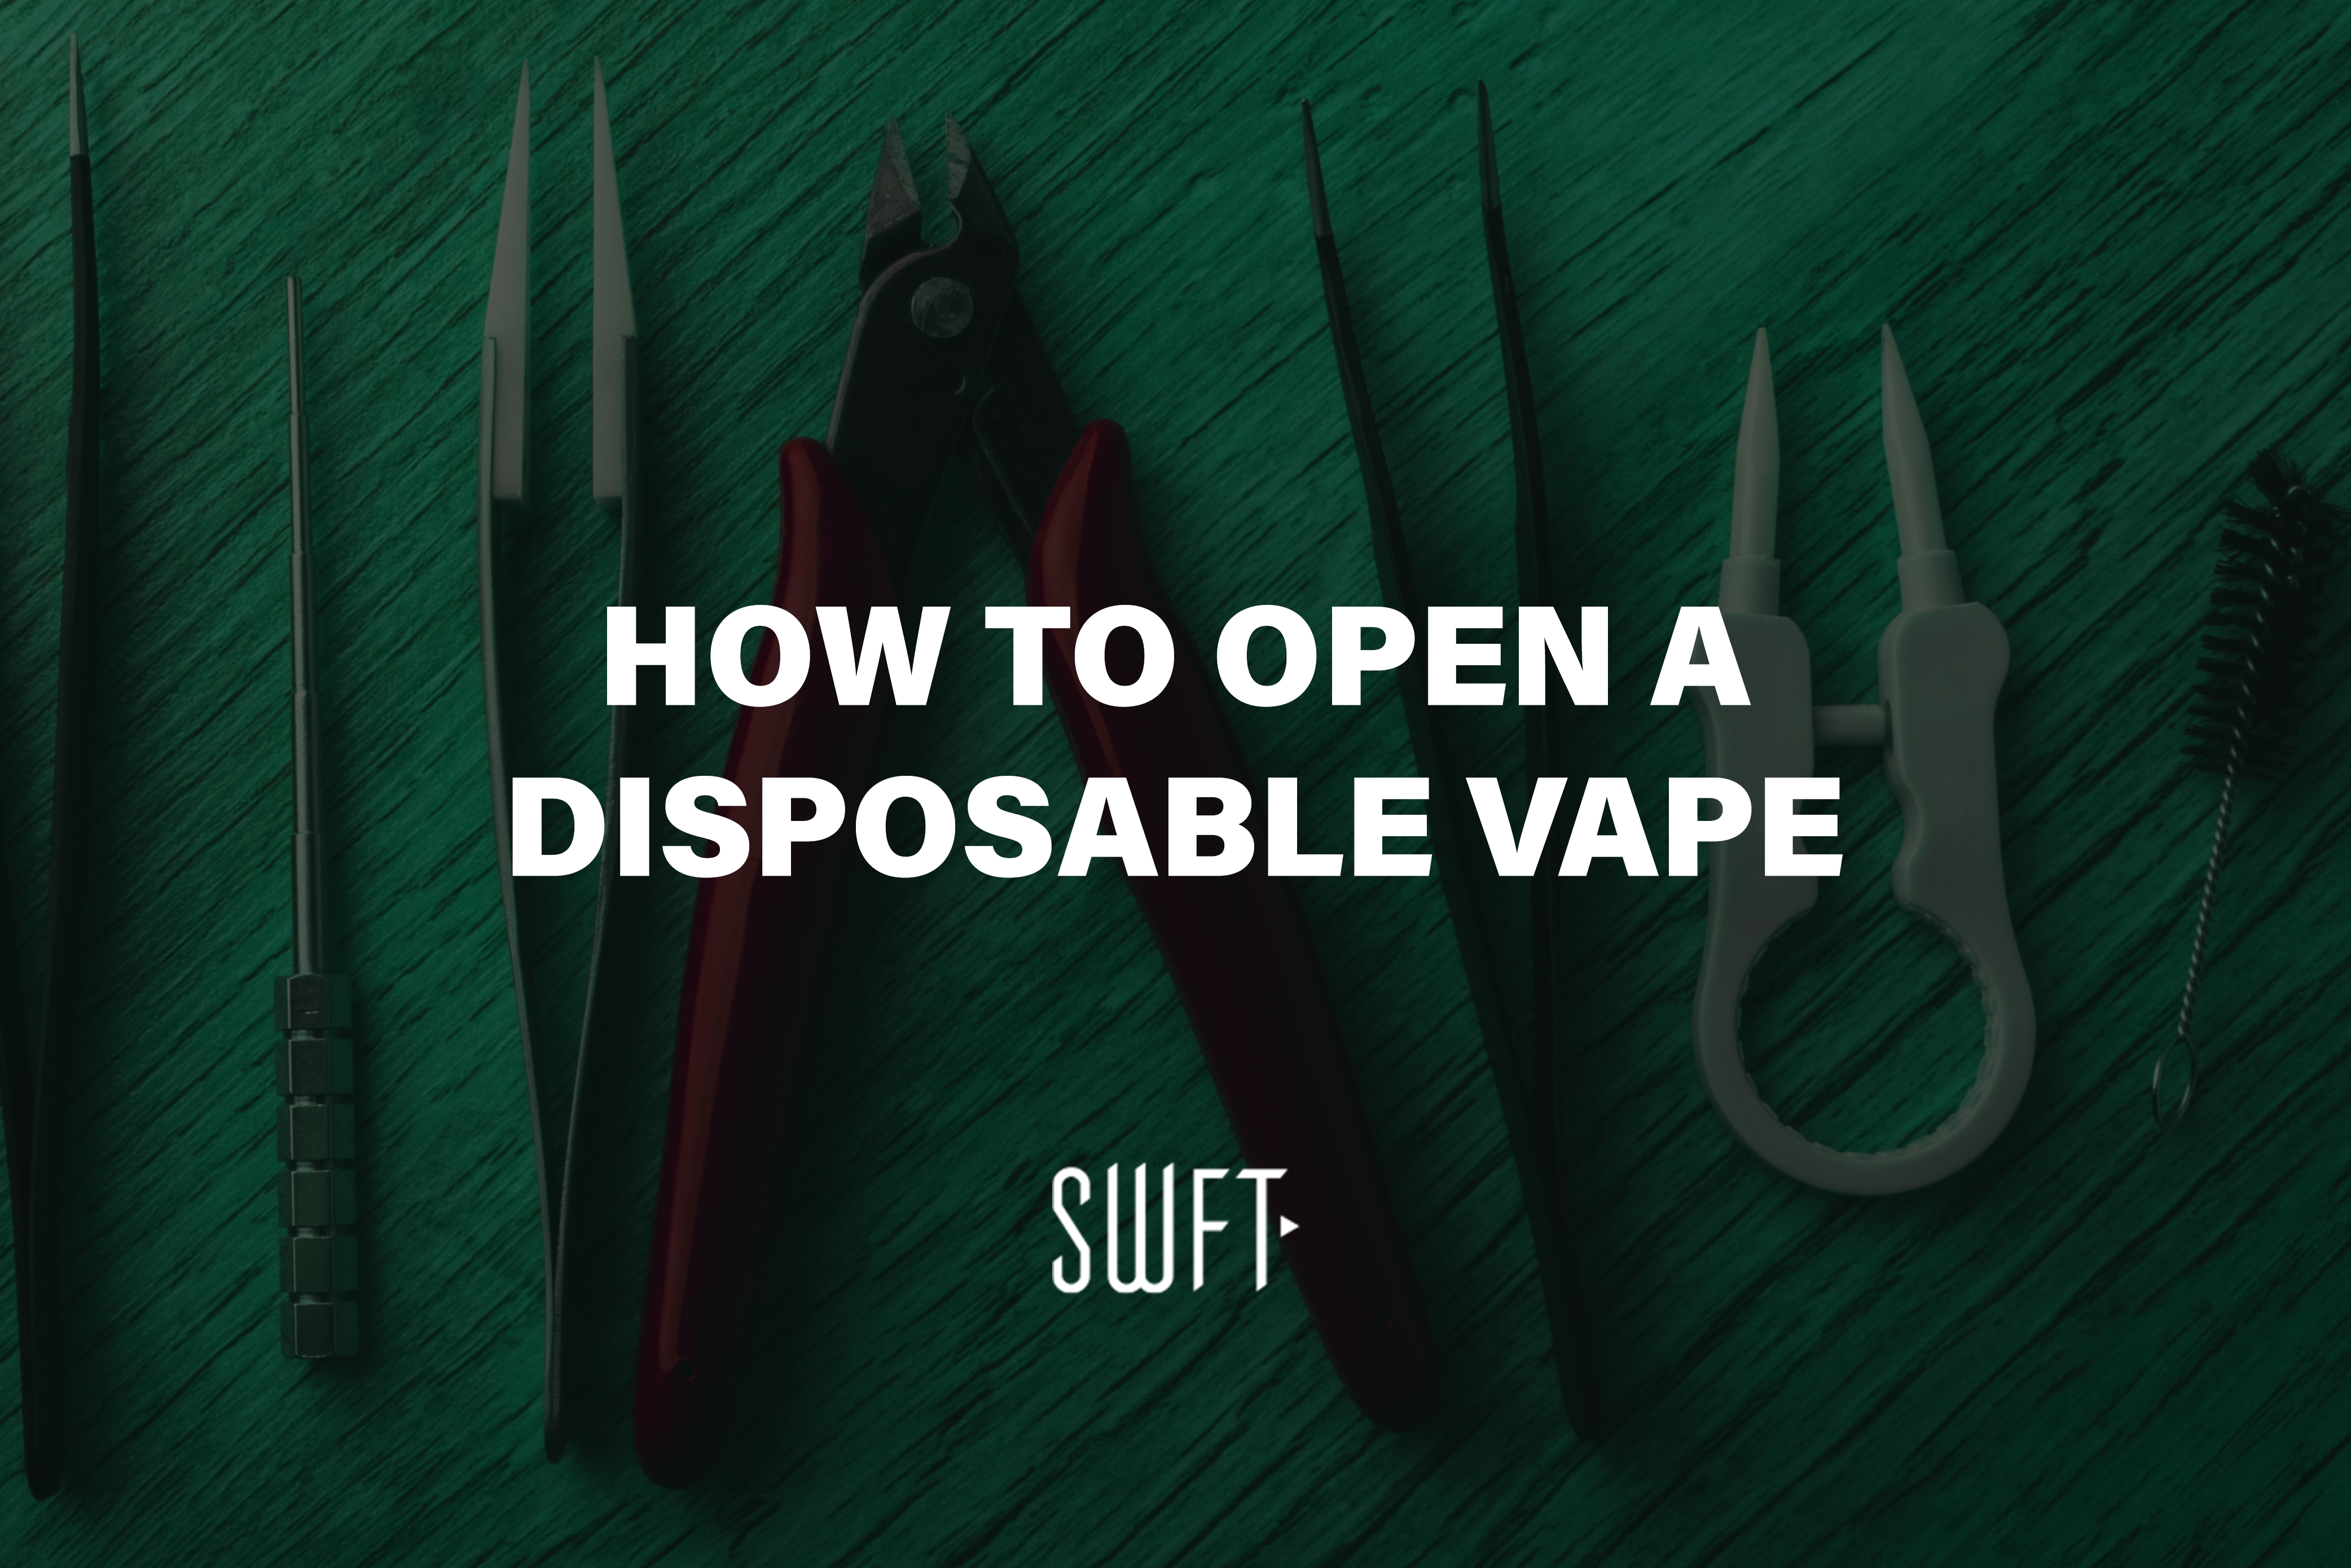 How to Open a Disposable Vape